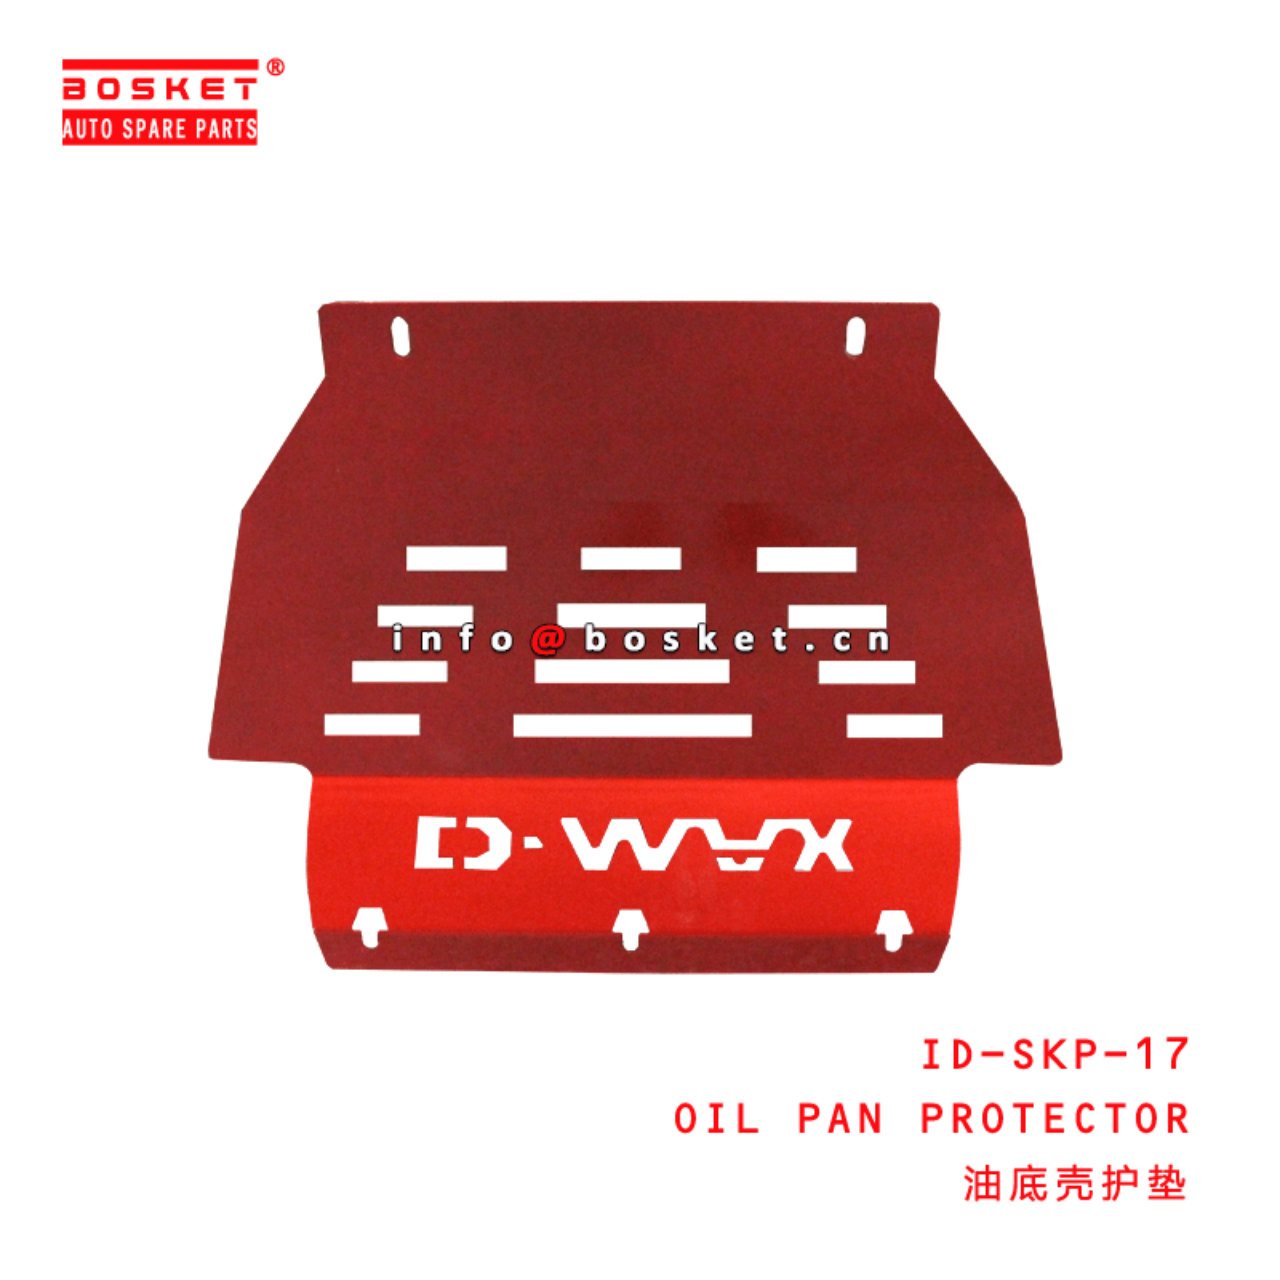  ID-SKP-17 Oil Pan Protector Suitable for ISUZU D-MAX 2017